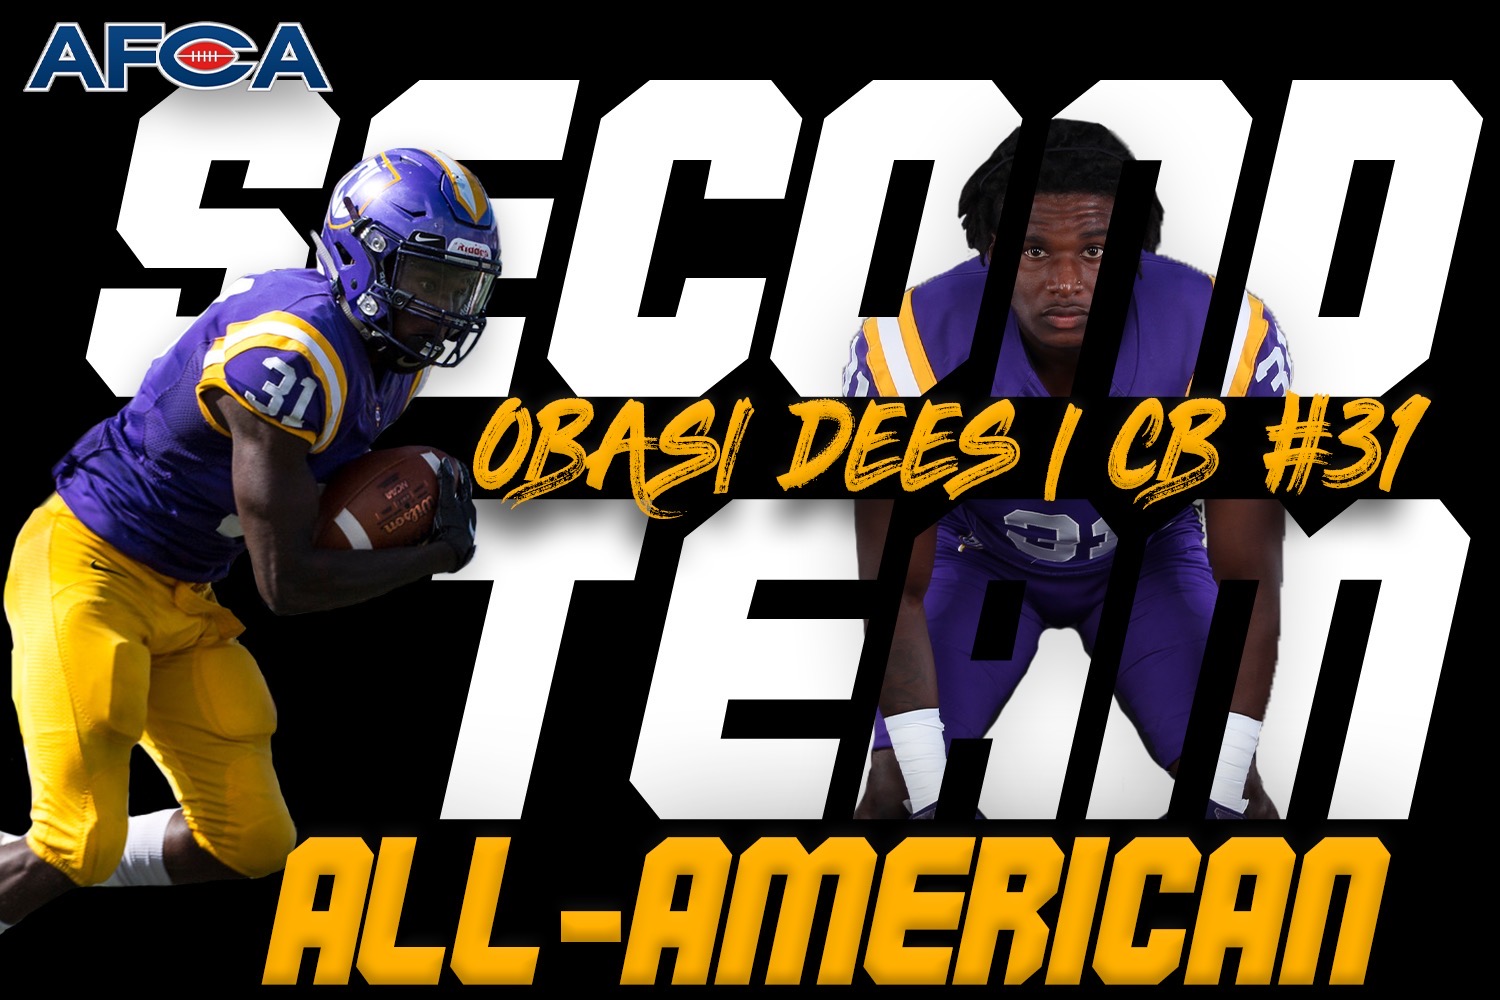 Dees Named Second Team All-America by AFCA